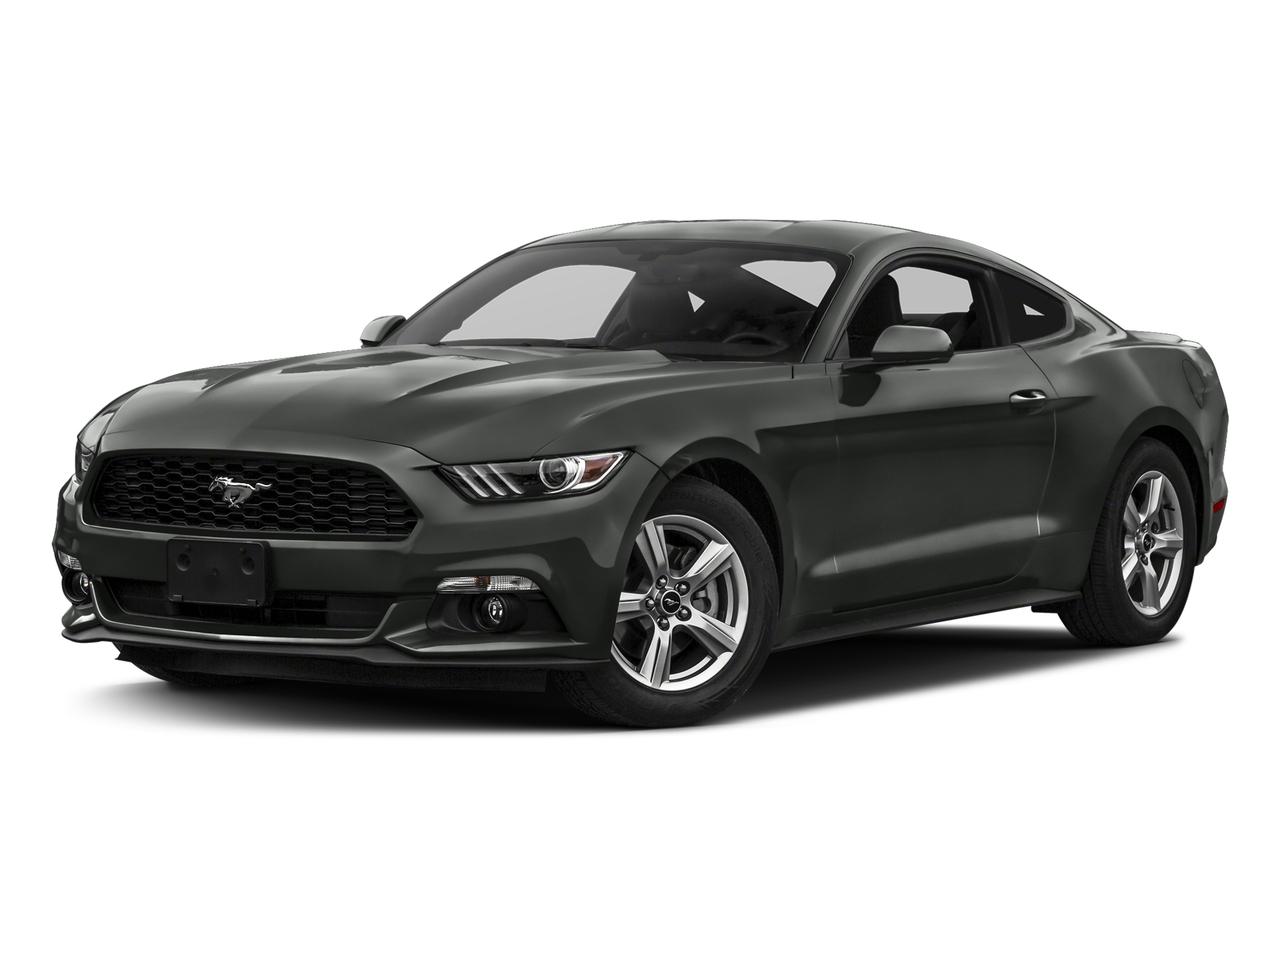 2017 Ford Mustang Vehicle Photo in St. Petersburg, FL 33713